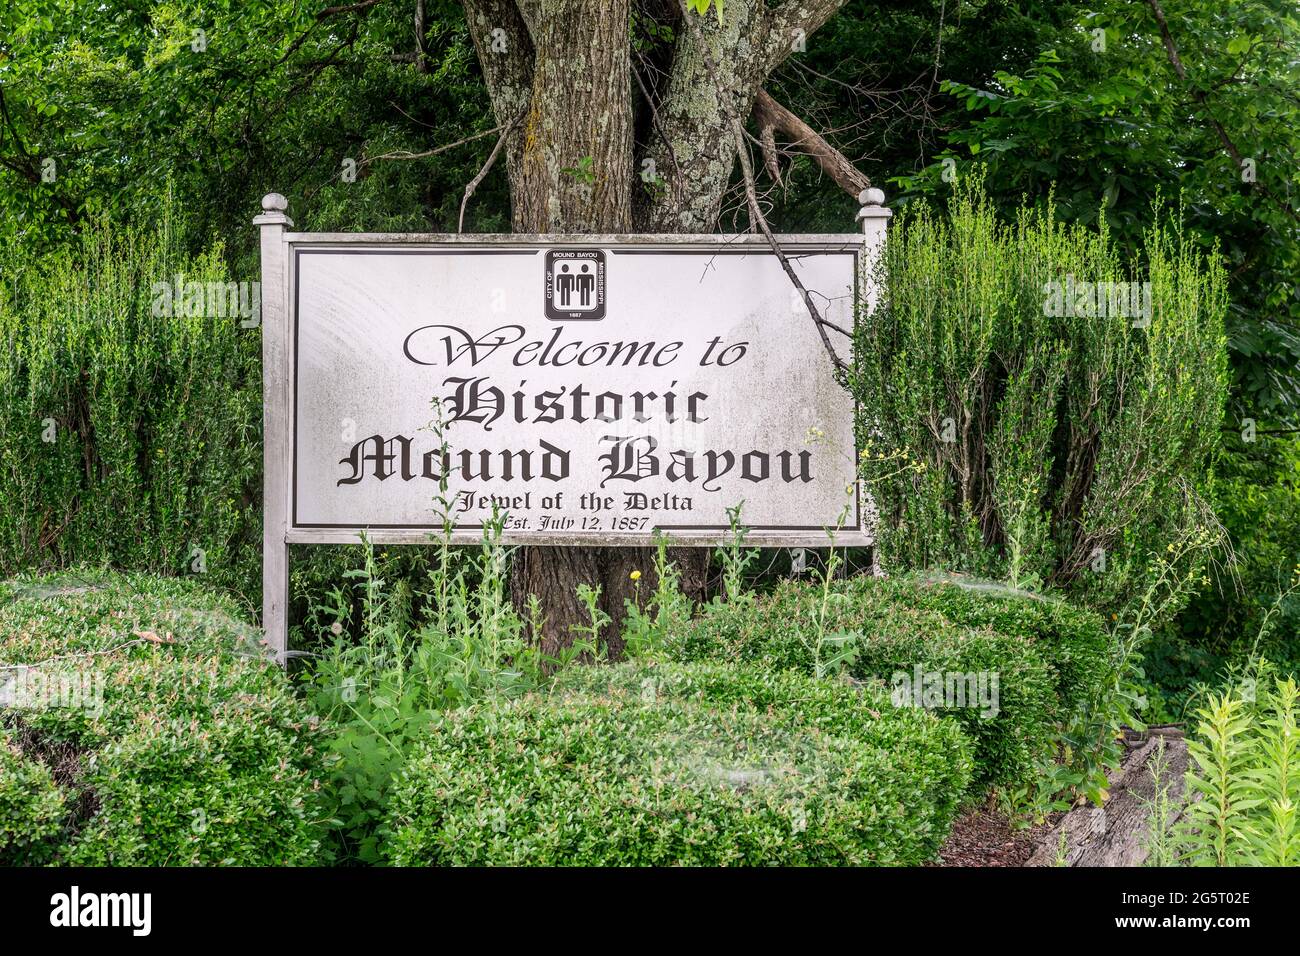 Historic Mound Bayou, Mississippi was founded by former slaves in 1887 as an autonomous all black community in the Mississippi Delta. Stock Photo